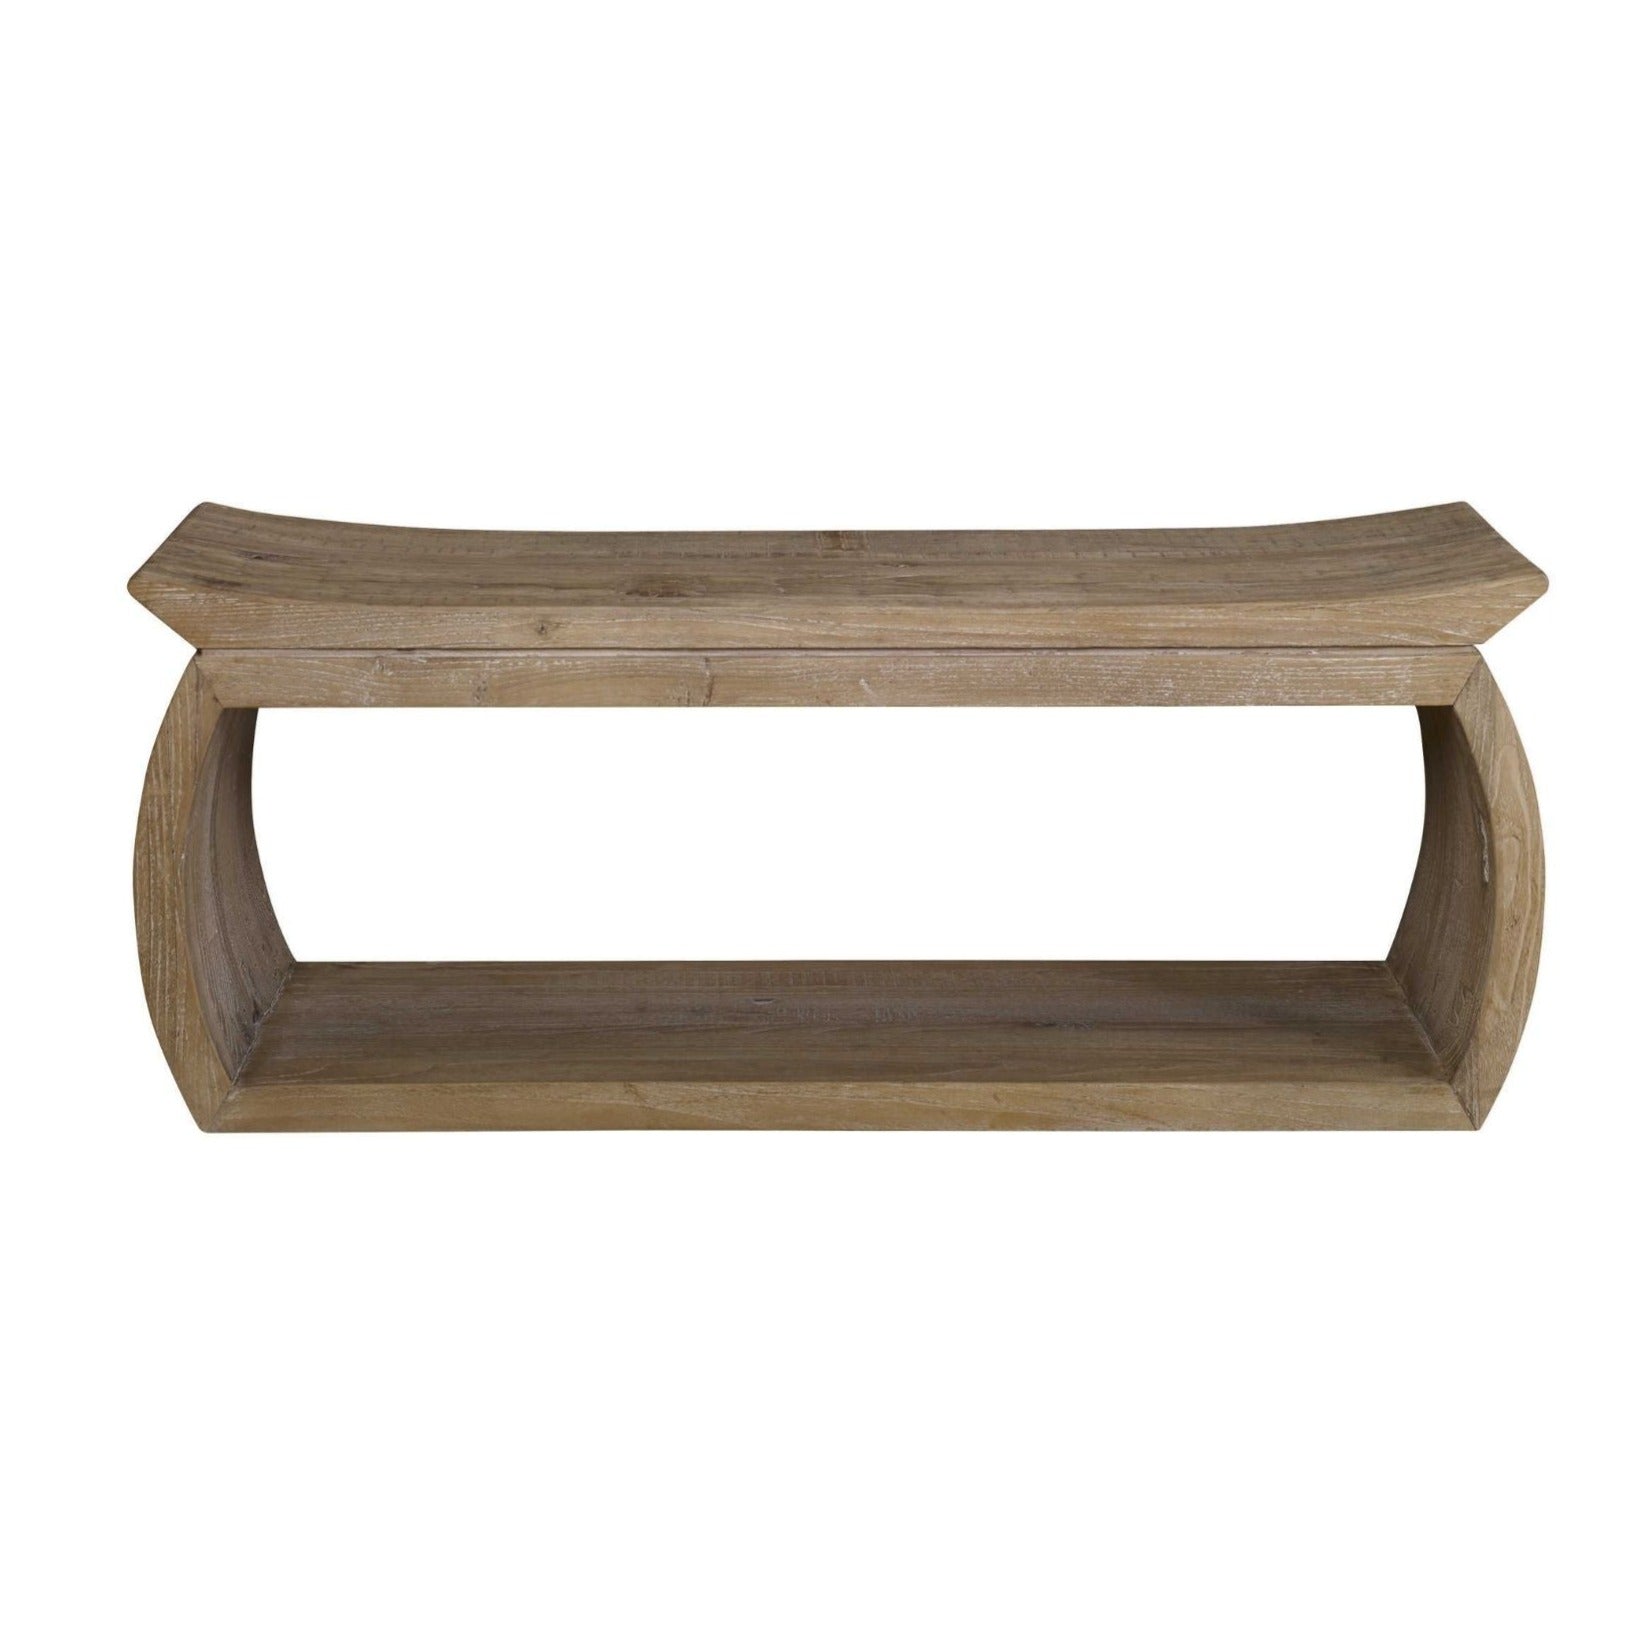 A bench built of 100% reclaimed elm wood, featuring an eye-catching scooped seat